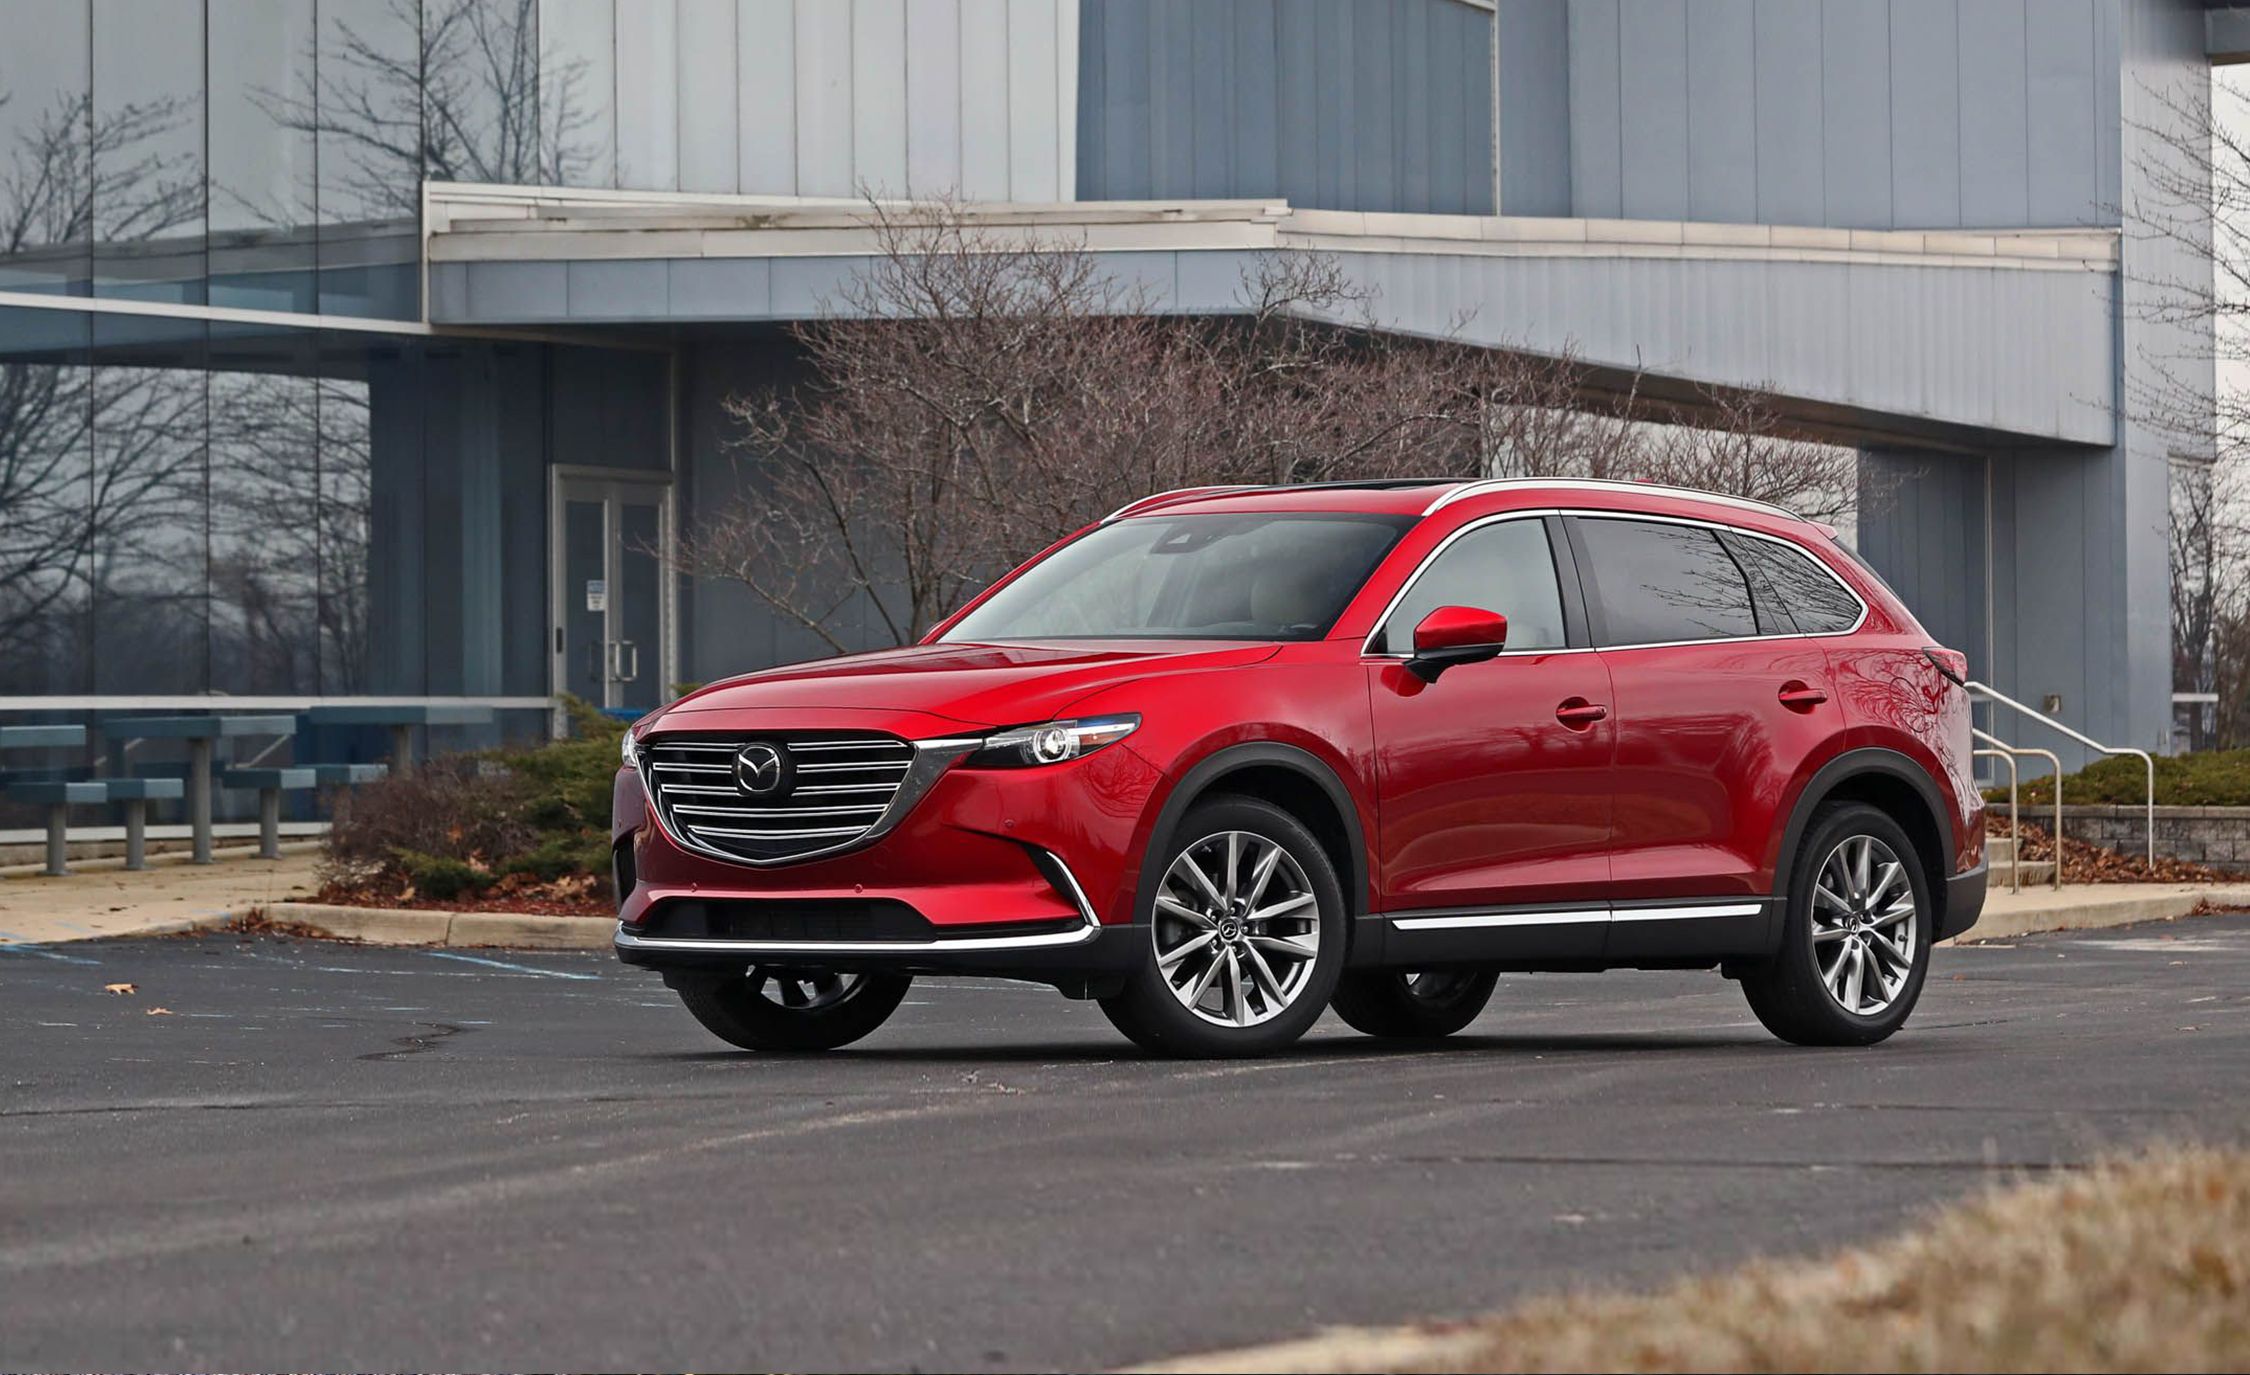 2019 Mazda CX-9 Review, Pricing, and Specs